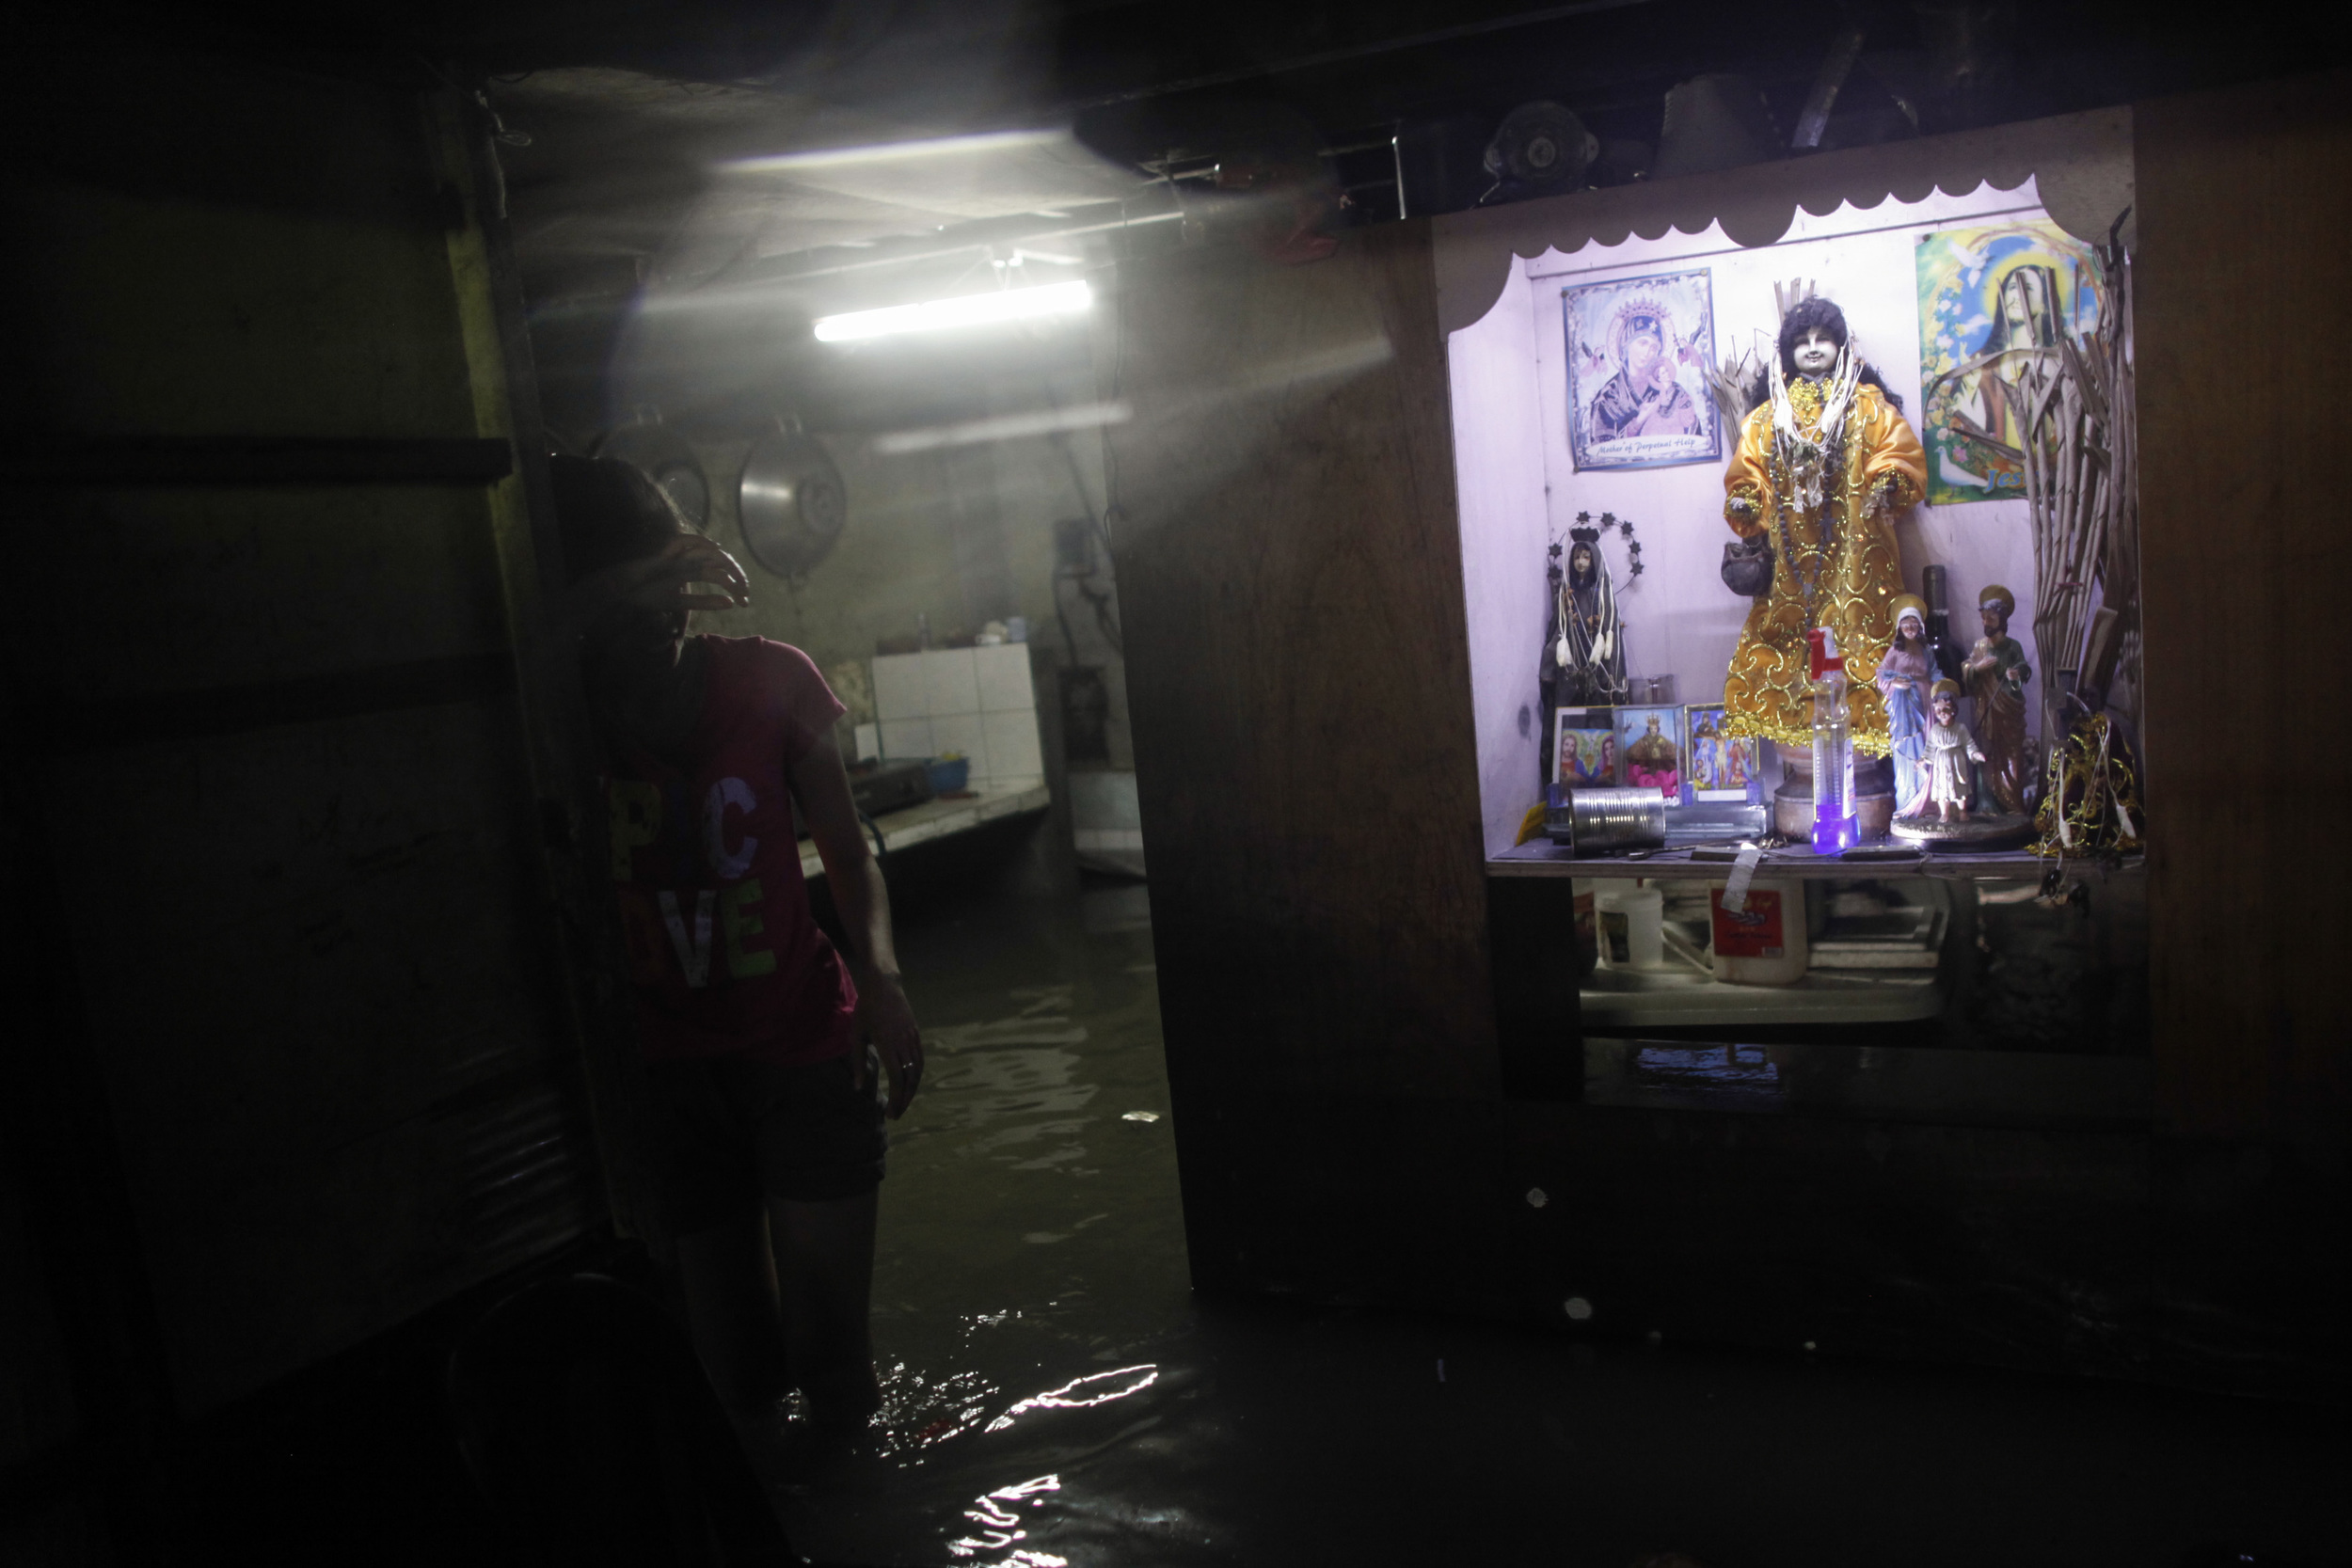  A resident takes a break from cleaning her house that was submerged in floodwaters caused by monsoon rains in Sucat, Paranaque south of Metro Manila August 19, 2013. Heavy rain in the Philippine capital forced the closure of government offices, scho